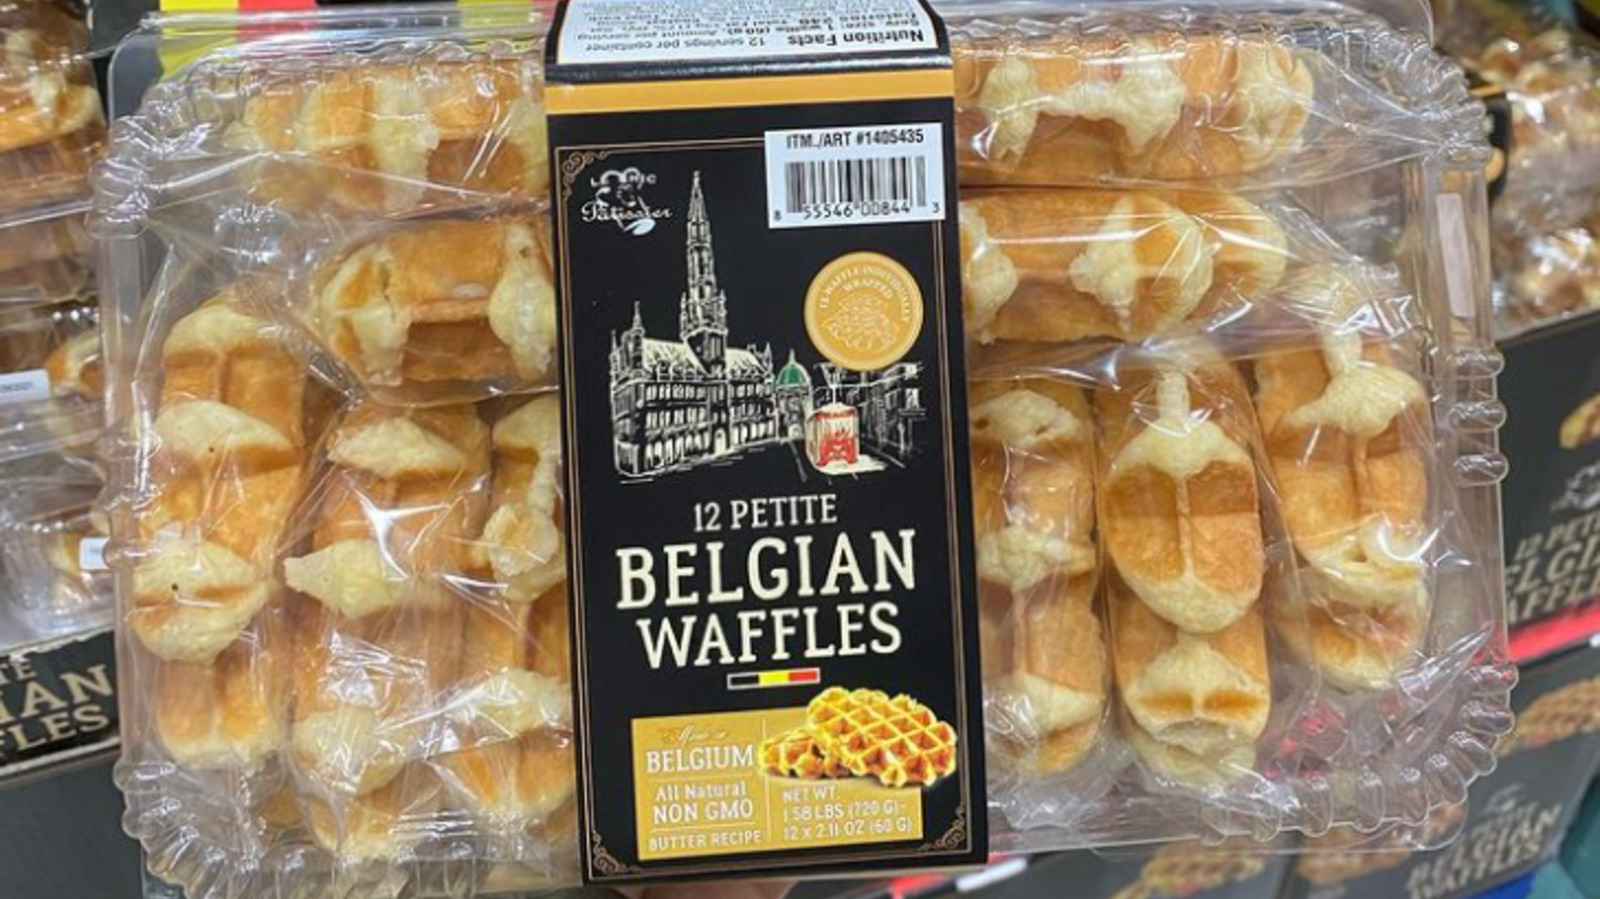 https://www.mashed.com/img/gallery/costco-shoppers-are-obsessed-with-these-petite-belgian-waffles/l-intro-1612515486.jpg